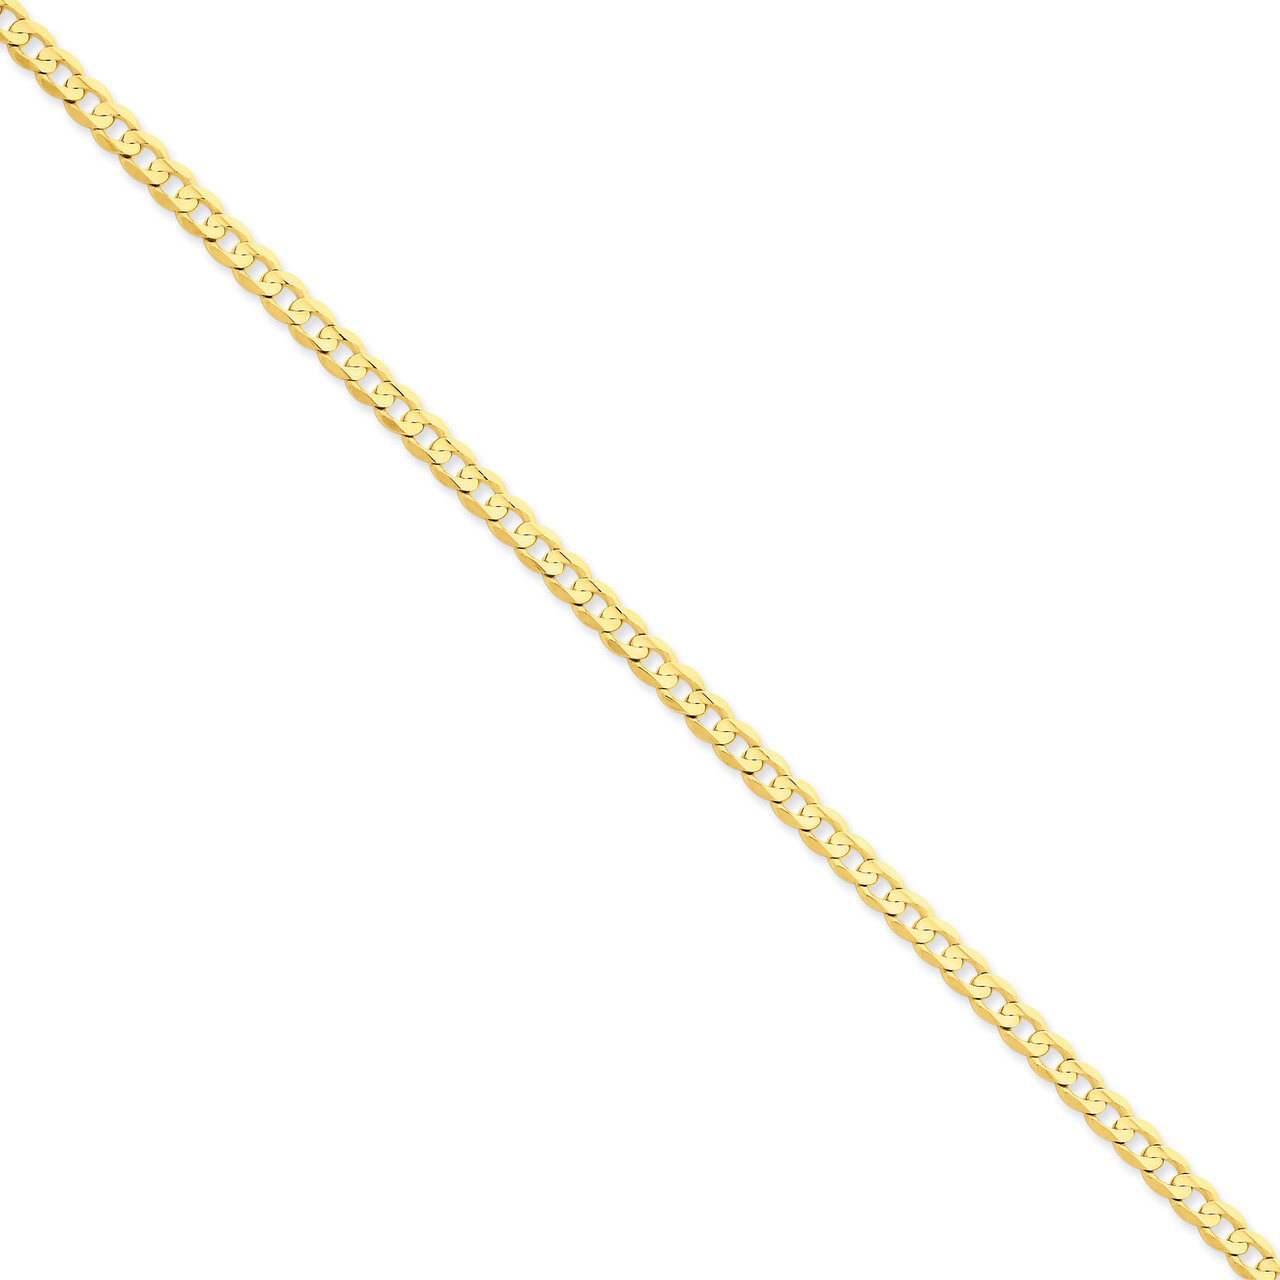 4.5mm Open Concave Curb Chain 20 Inch 14k Gold LCR120-20